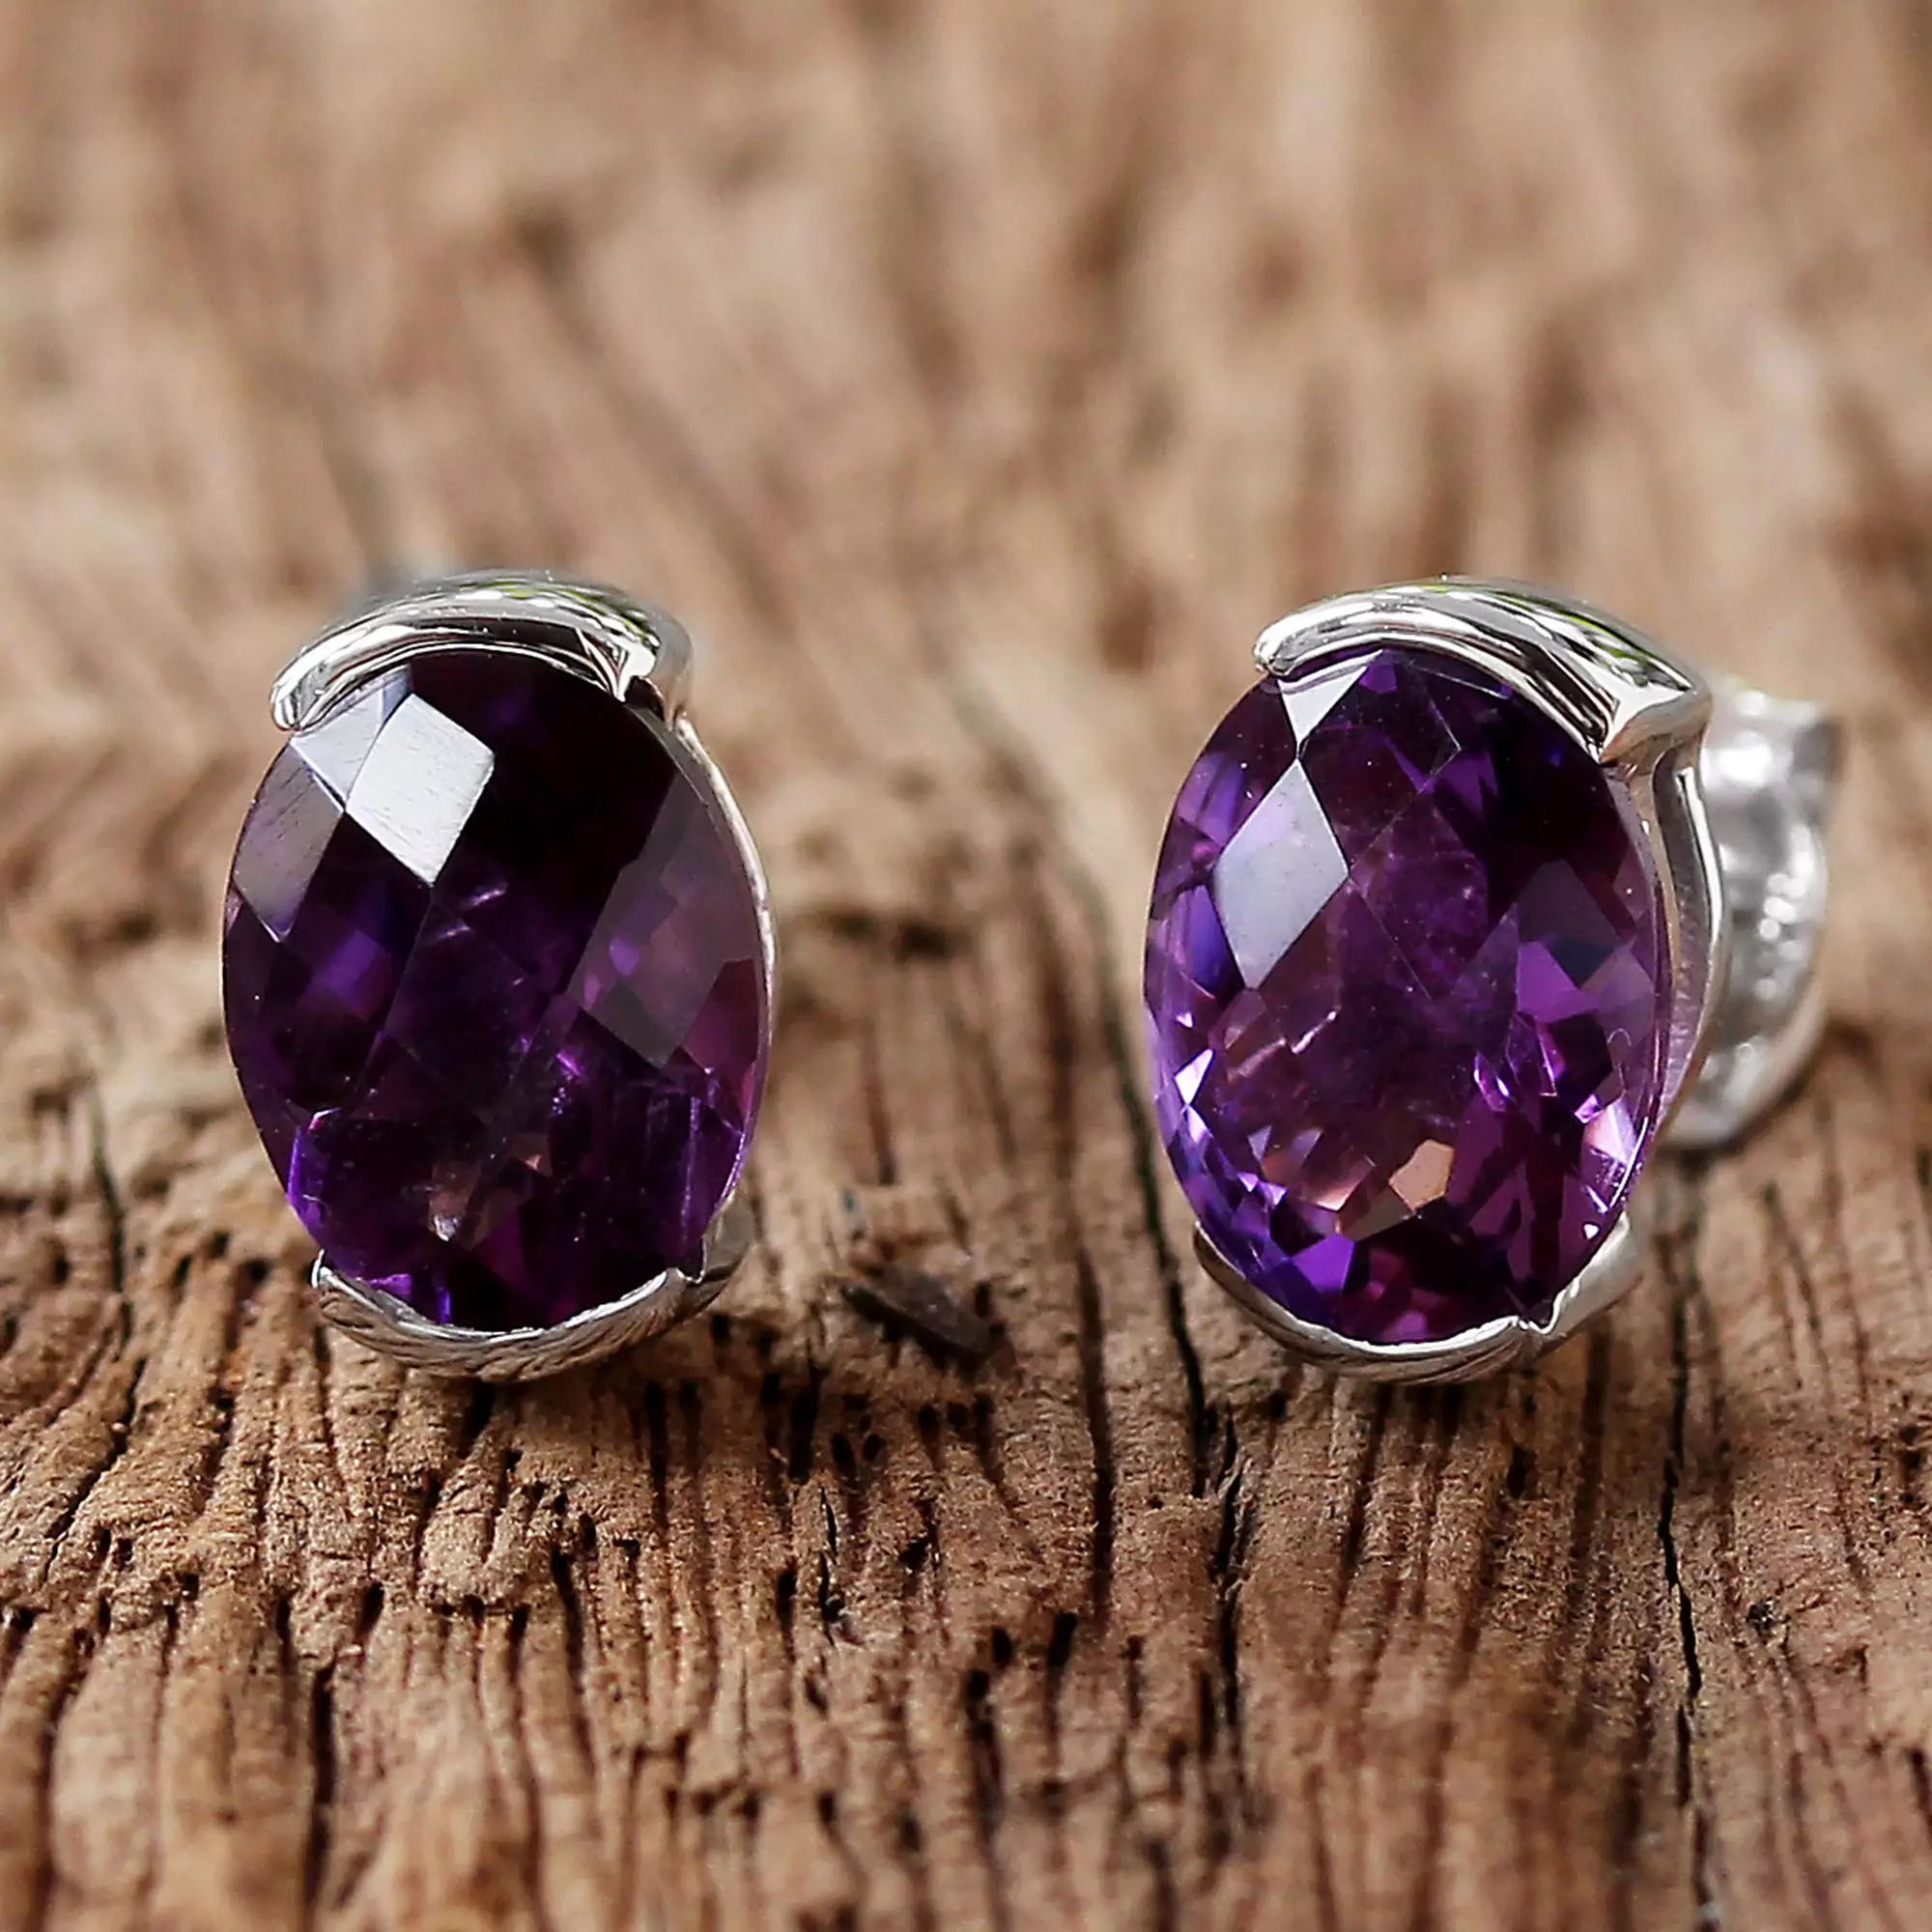 ‘Precious Plum’ Amethyst and Sterling Silver Stud Earrings from Thailand Earring and Necklace Pairings